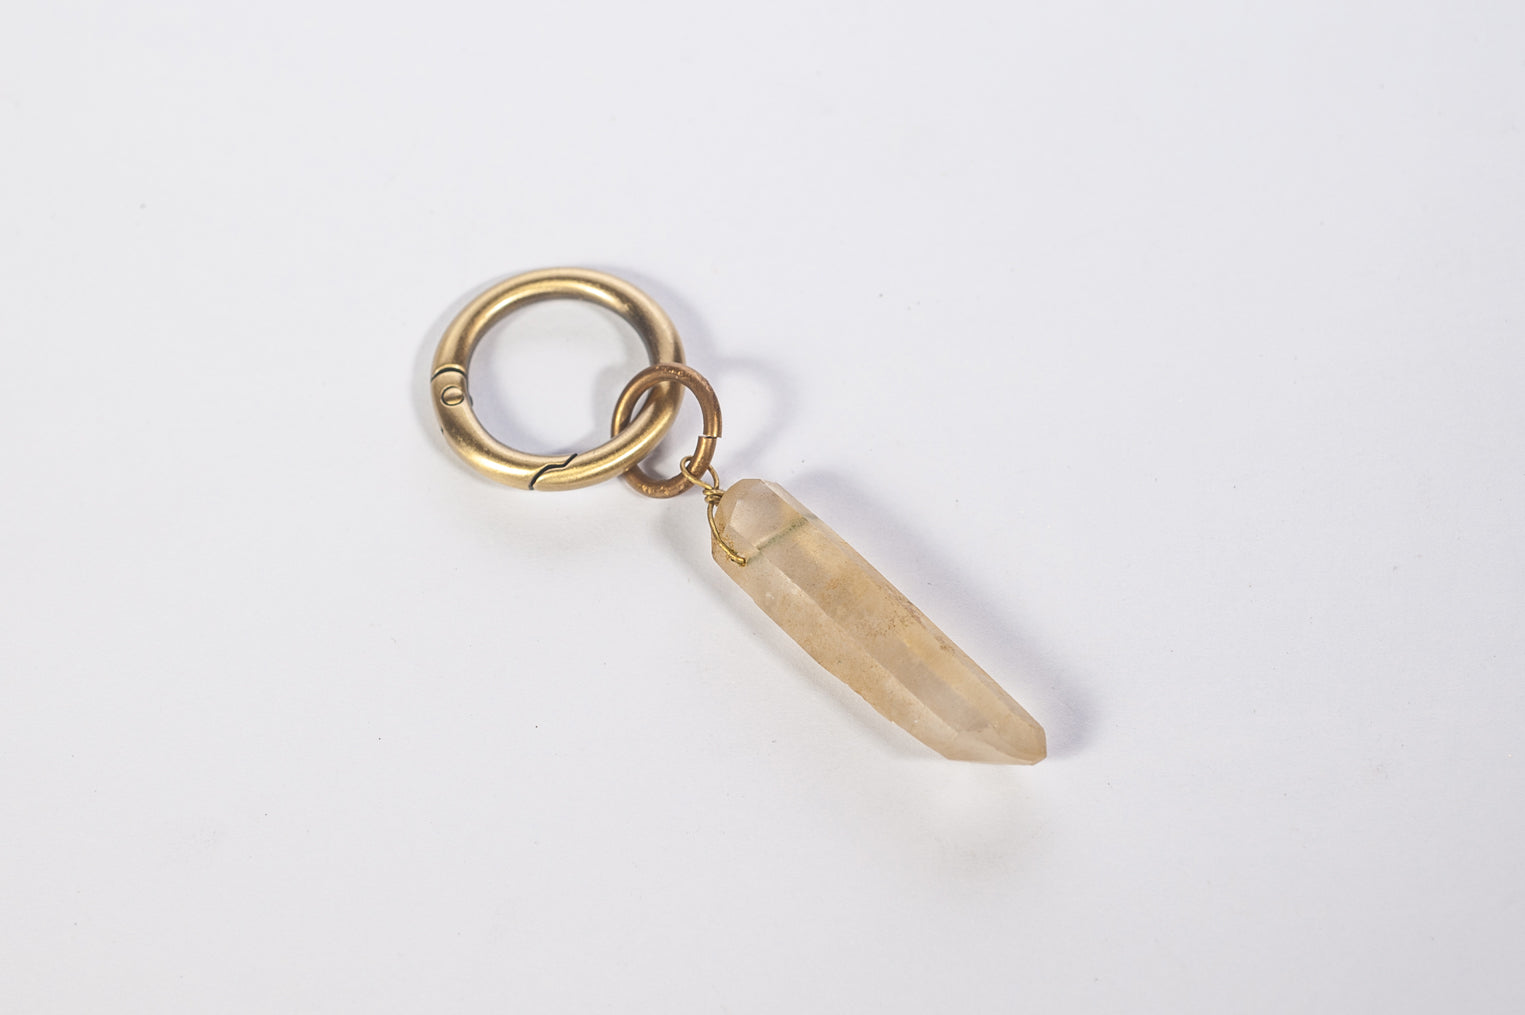 Small Crystal and Wood Pendant or Keyring